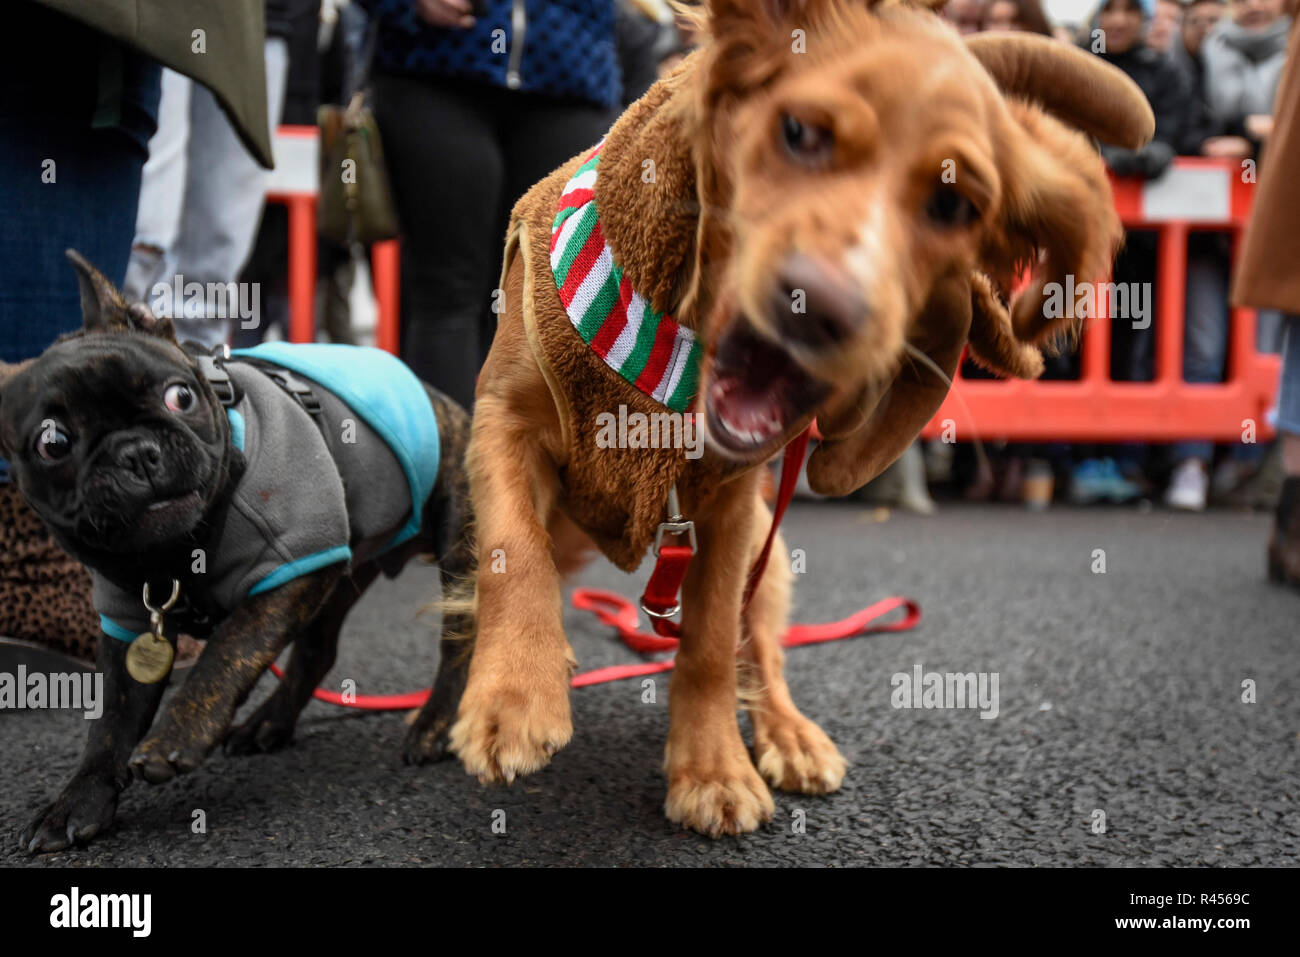 London, UK. 25 November 2018. Rufus, a cocker spaniel, and Henry, a French bulldog  mix, play together in the Primrose Hill dog show during the Primrose Hill  Christmas Fair. The fun show